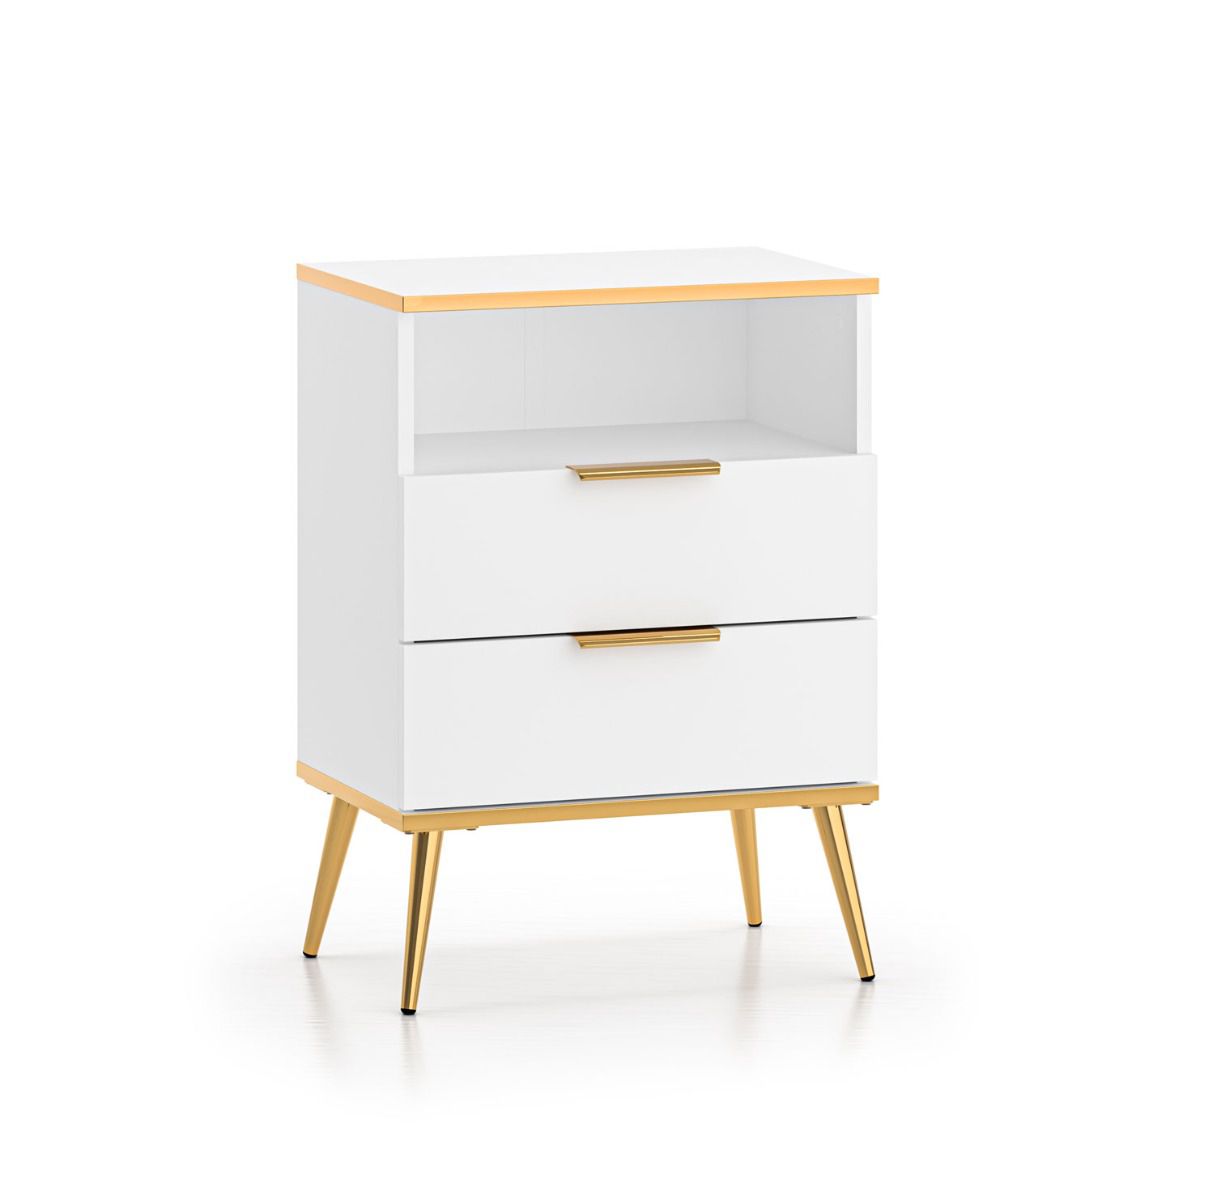 Light bedside cabinet with two drawers Breckenridge 08, color: white, soft-close system, dimensions: 70 x 50 x 34 cm, legs & handles: gold, with one open compartment